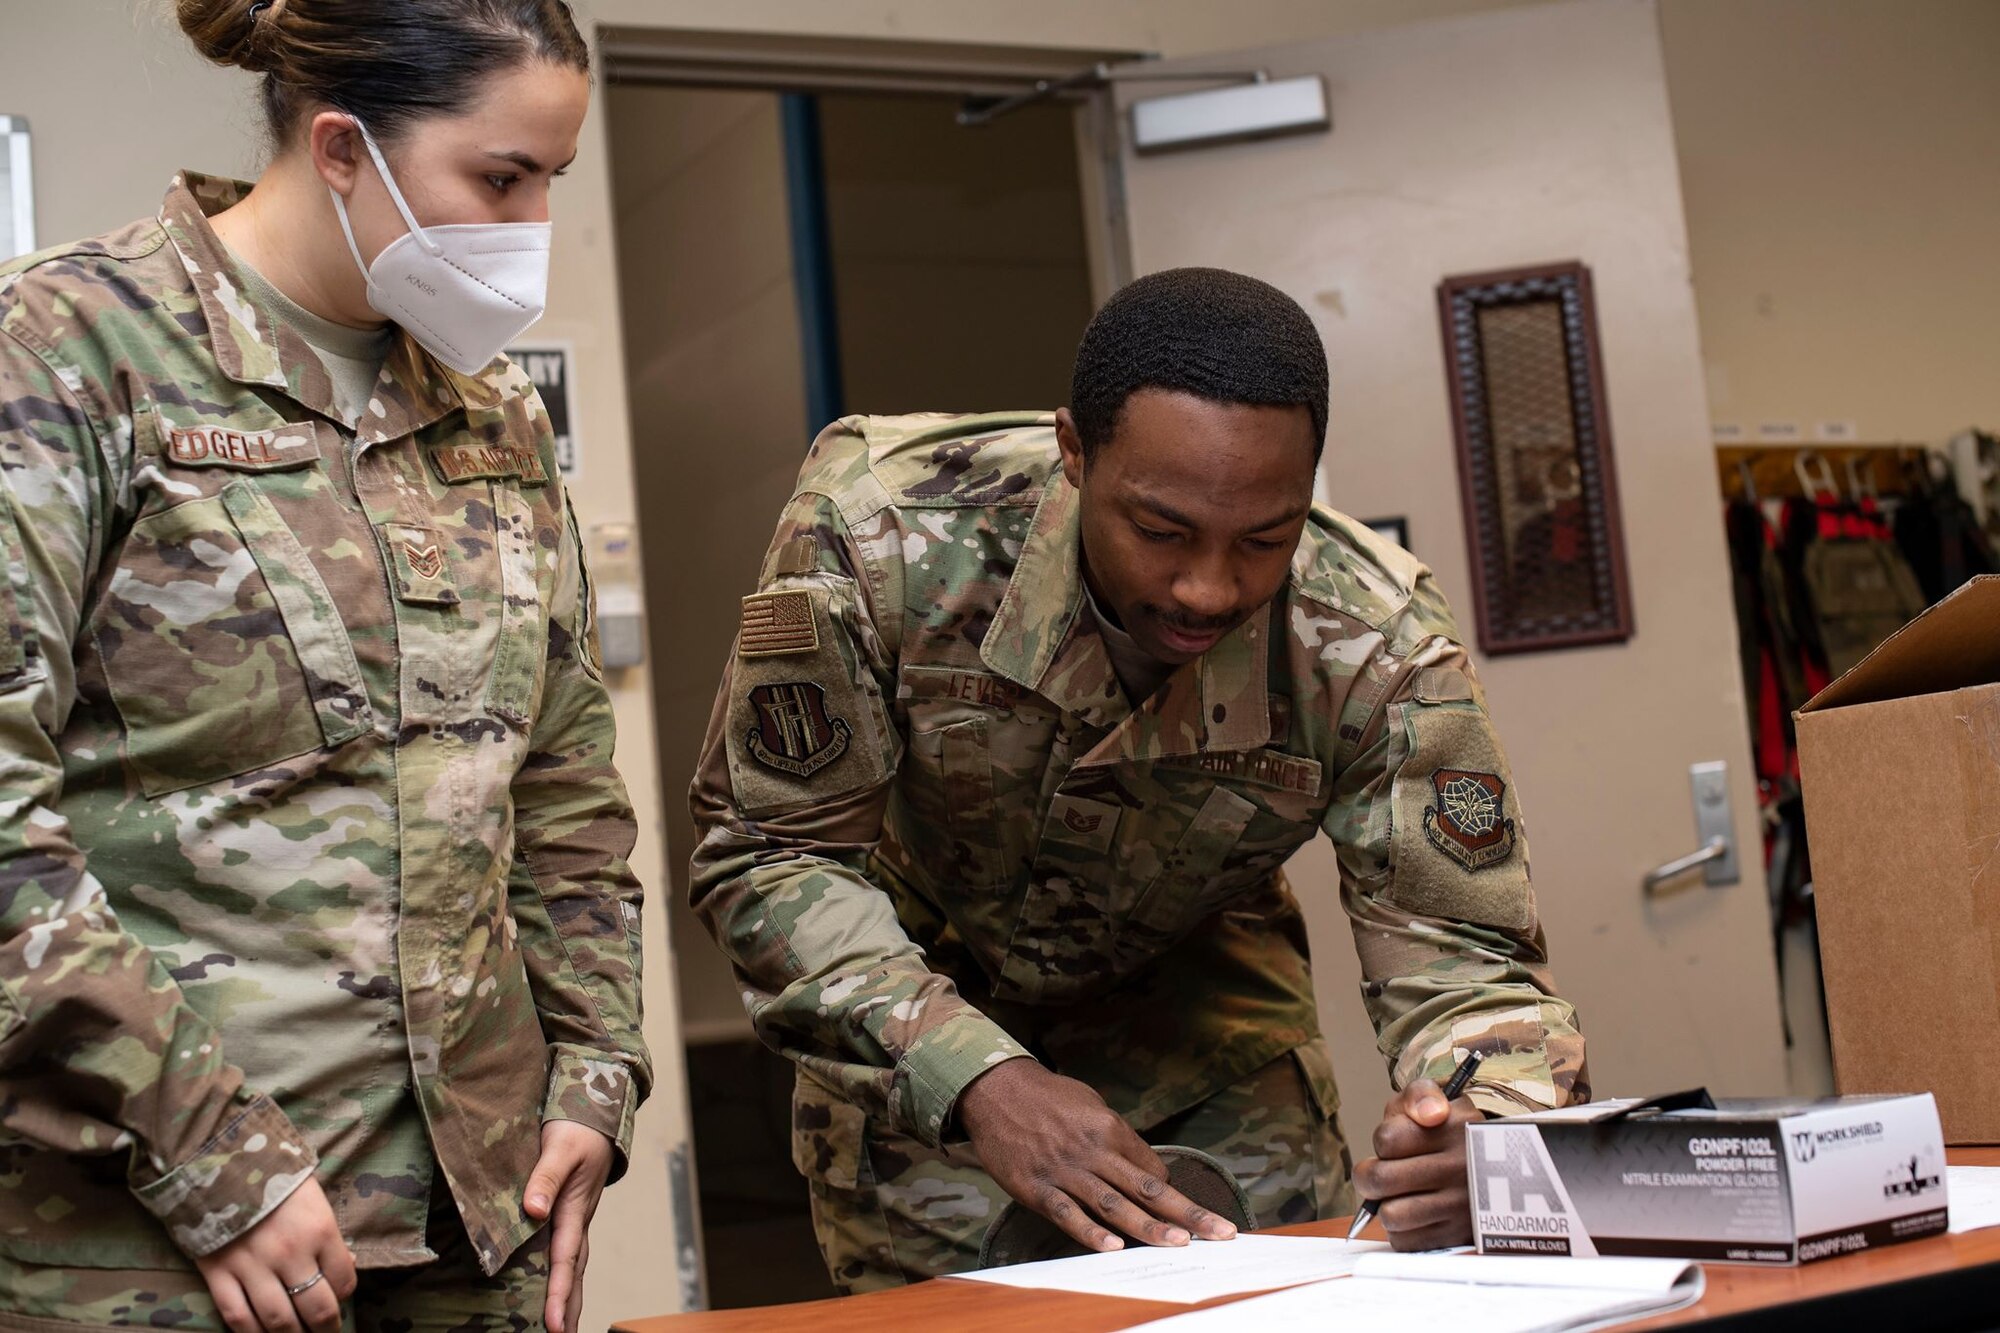 A female Airmen with a white face mask on supervises a male Airmen signing a document in front of a box full of black face masks